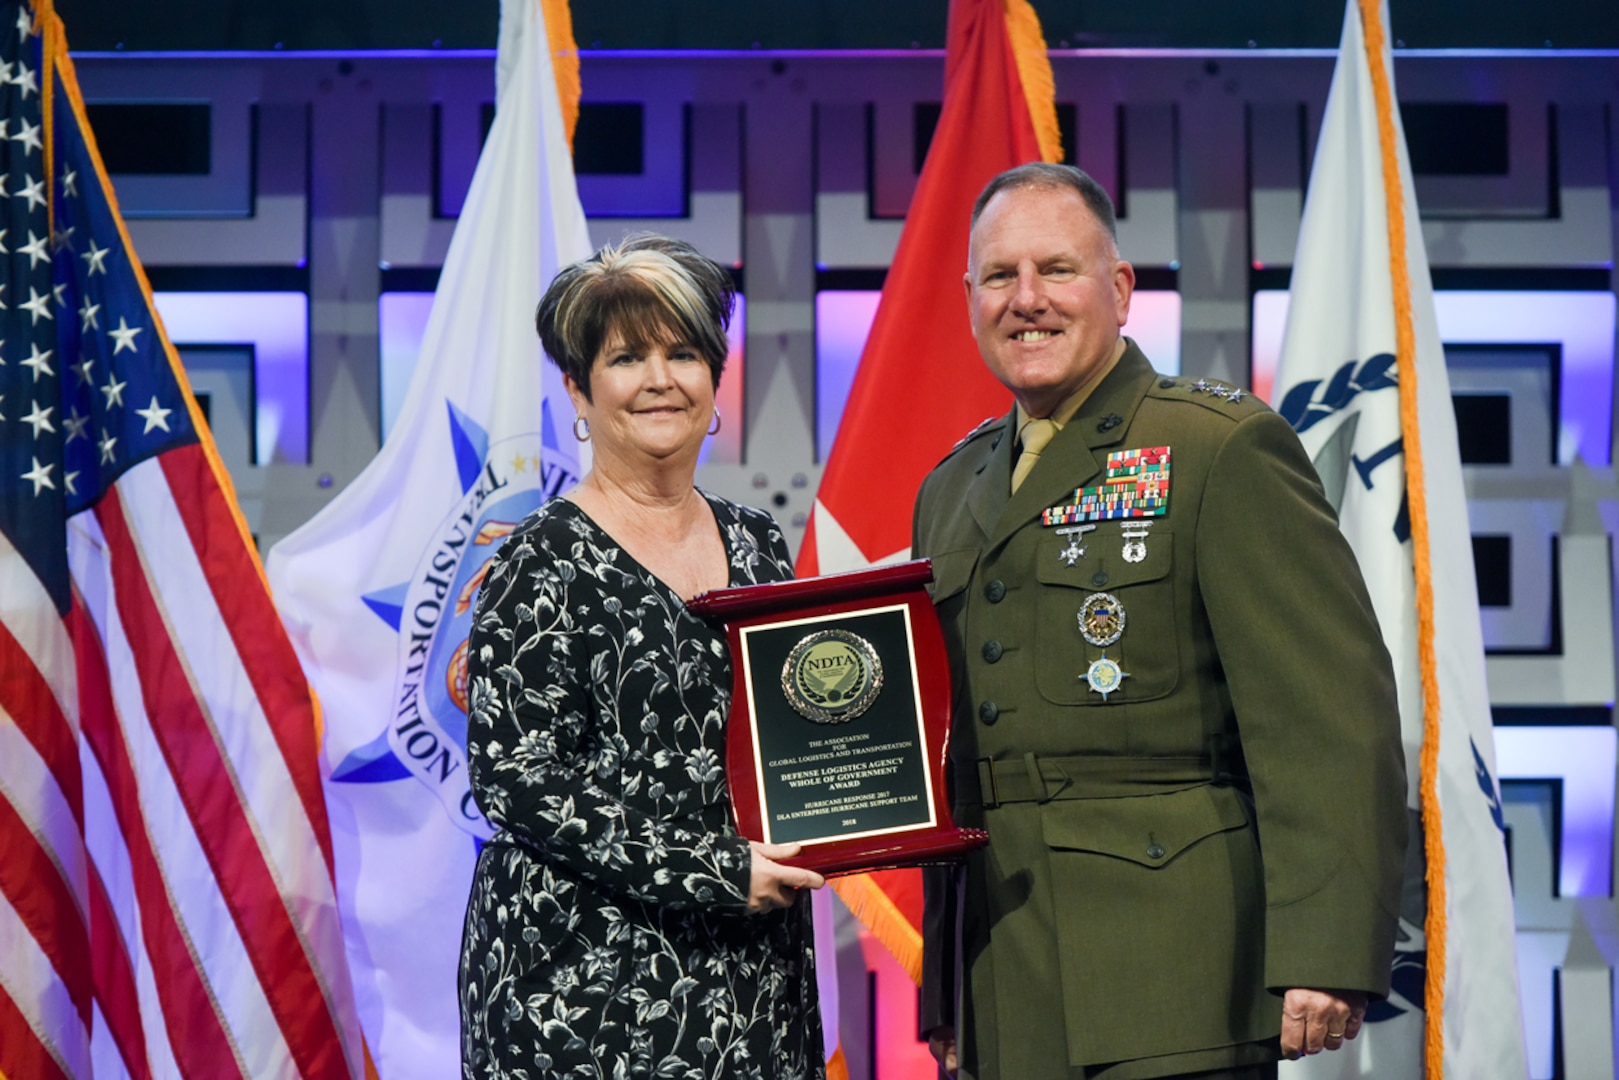 Transportation employees receive award at Defense conference